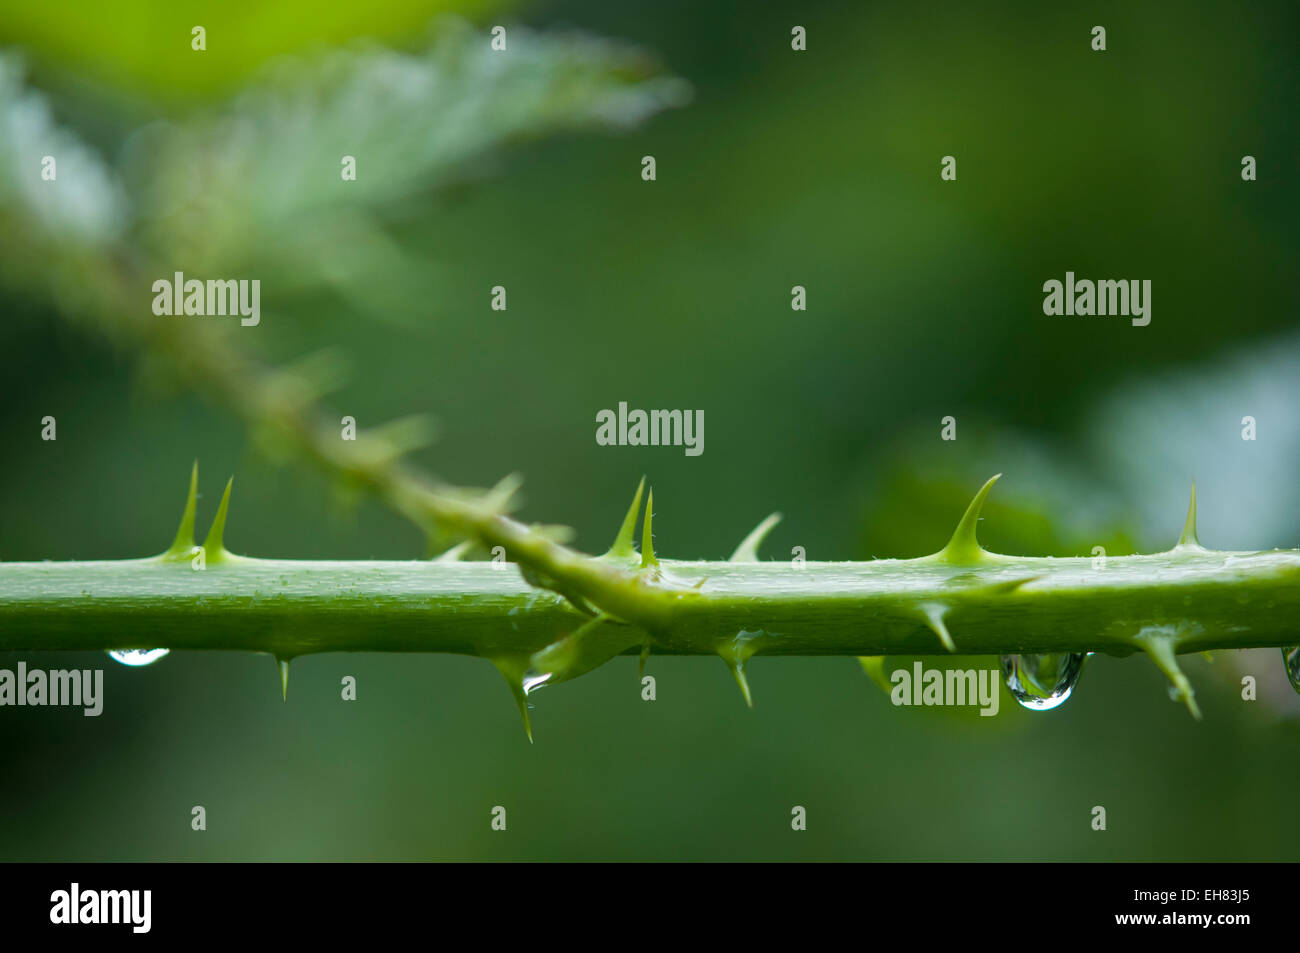 Spines on the stem of a Bramble. Natural close up with green background. Water drops on the stem. Stock Photo